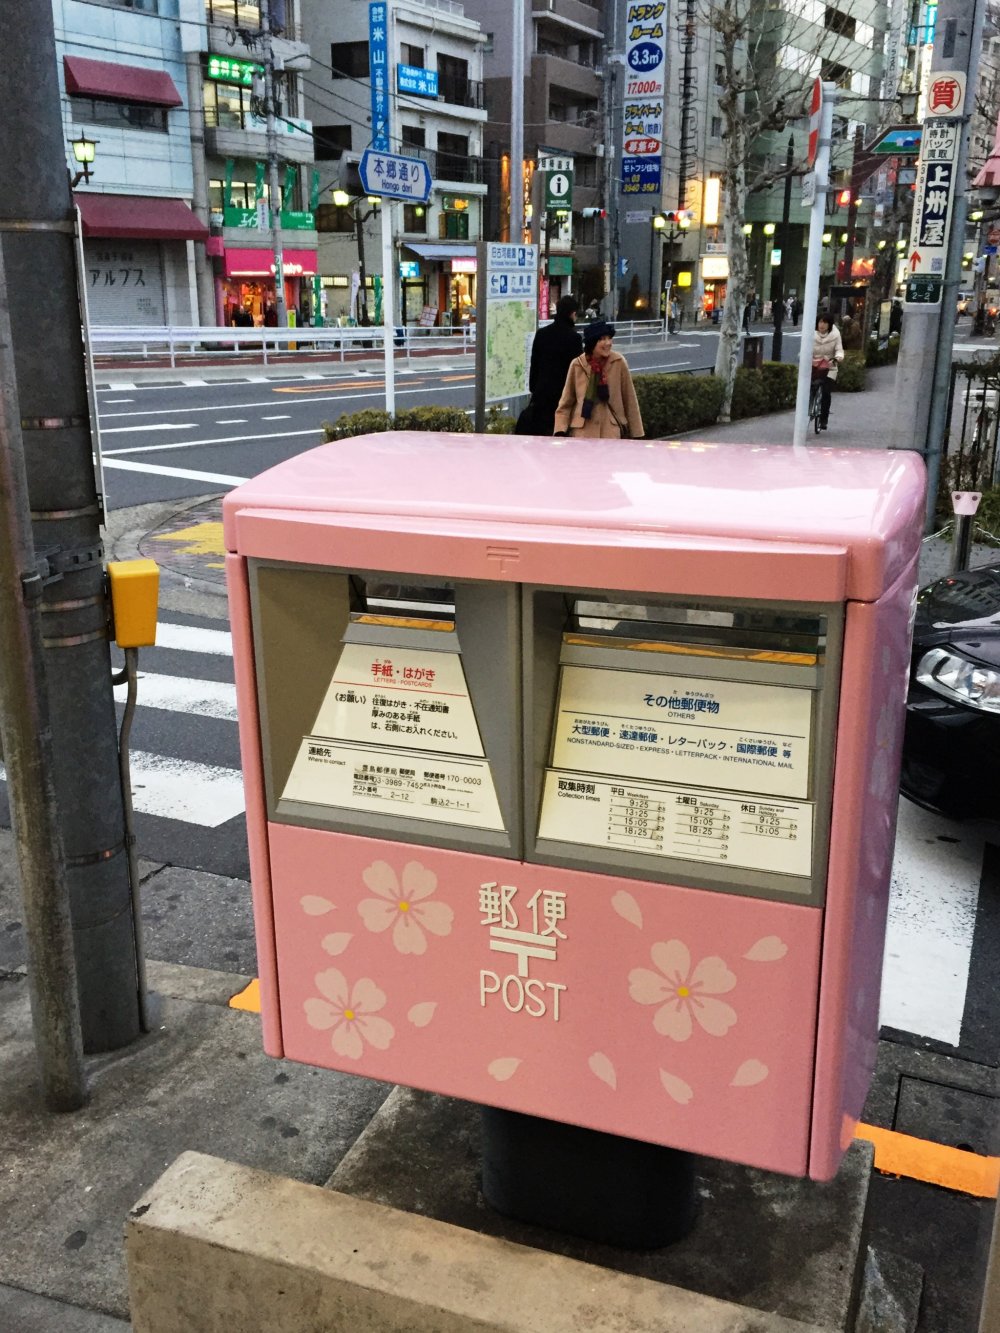 Japan's only blue old-school post box: Where is it and why is it